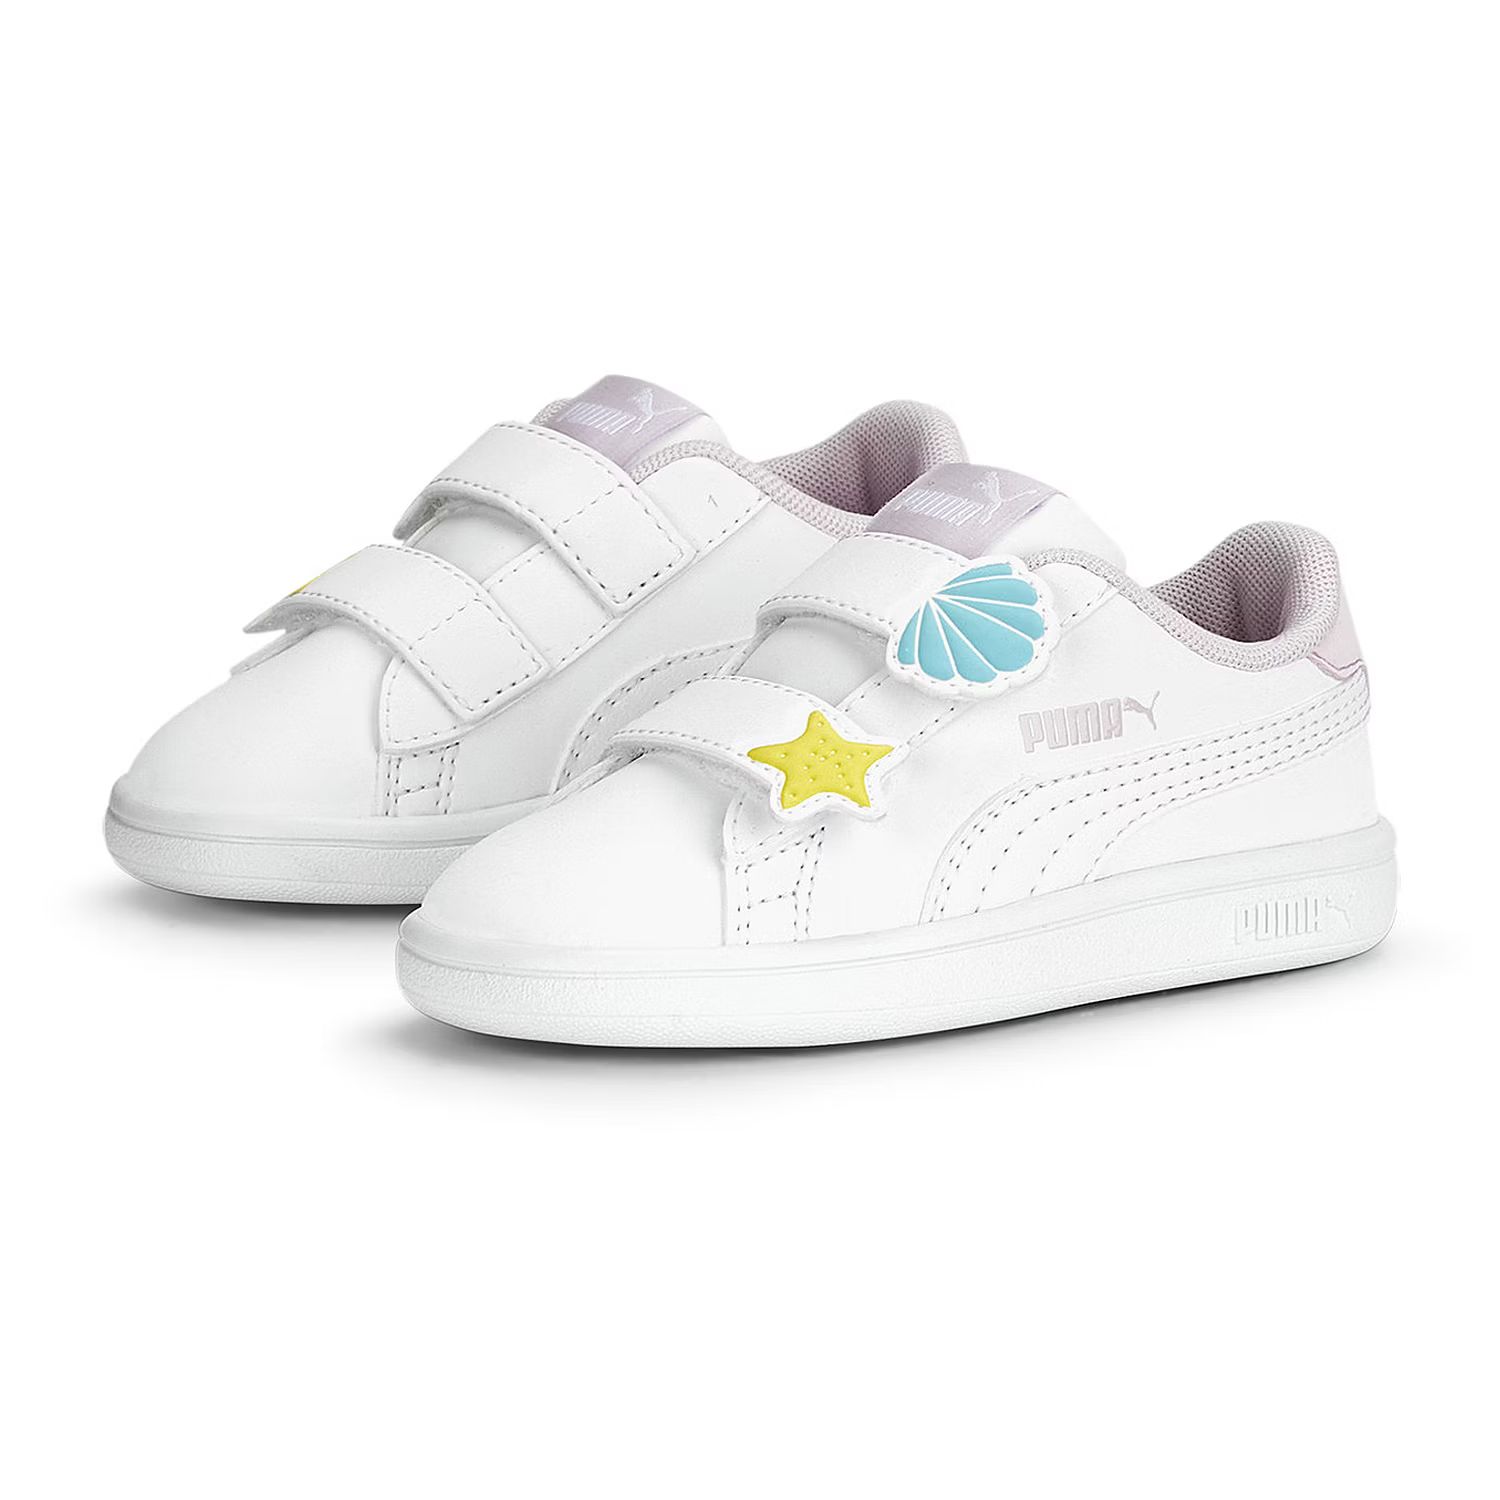 new!Puma Smash Mermaid Toddler Girls Sneakers | JCPenney